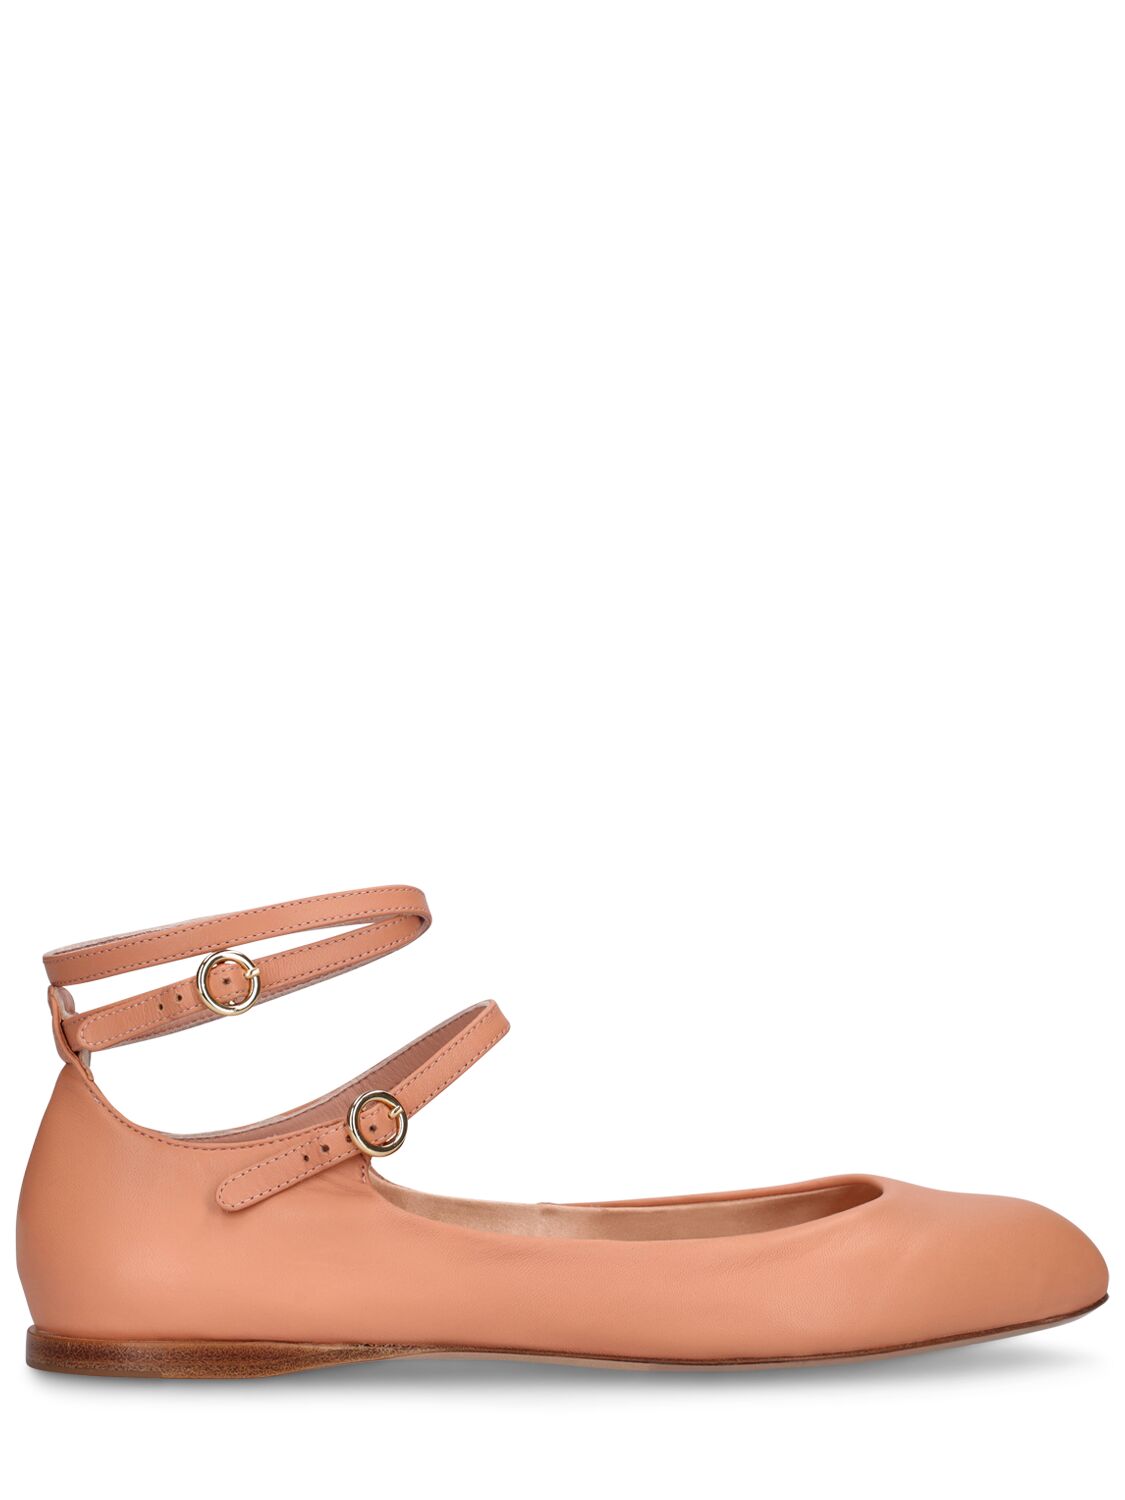 Max Mara 10mm Norma Leather Ballet Flats In Blush